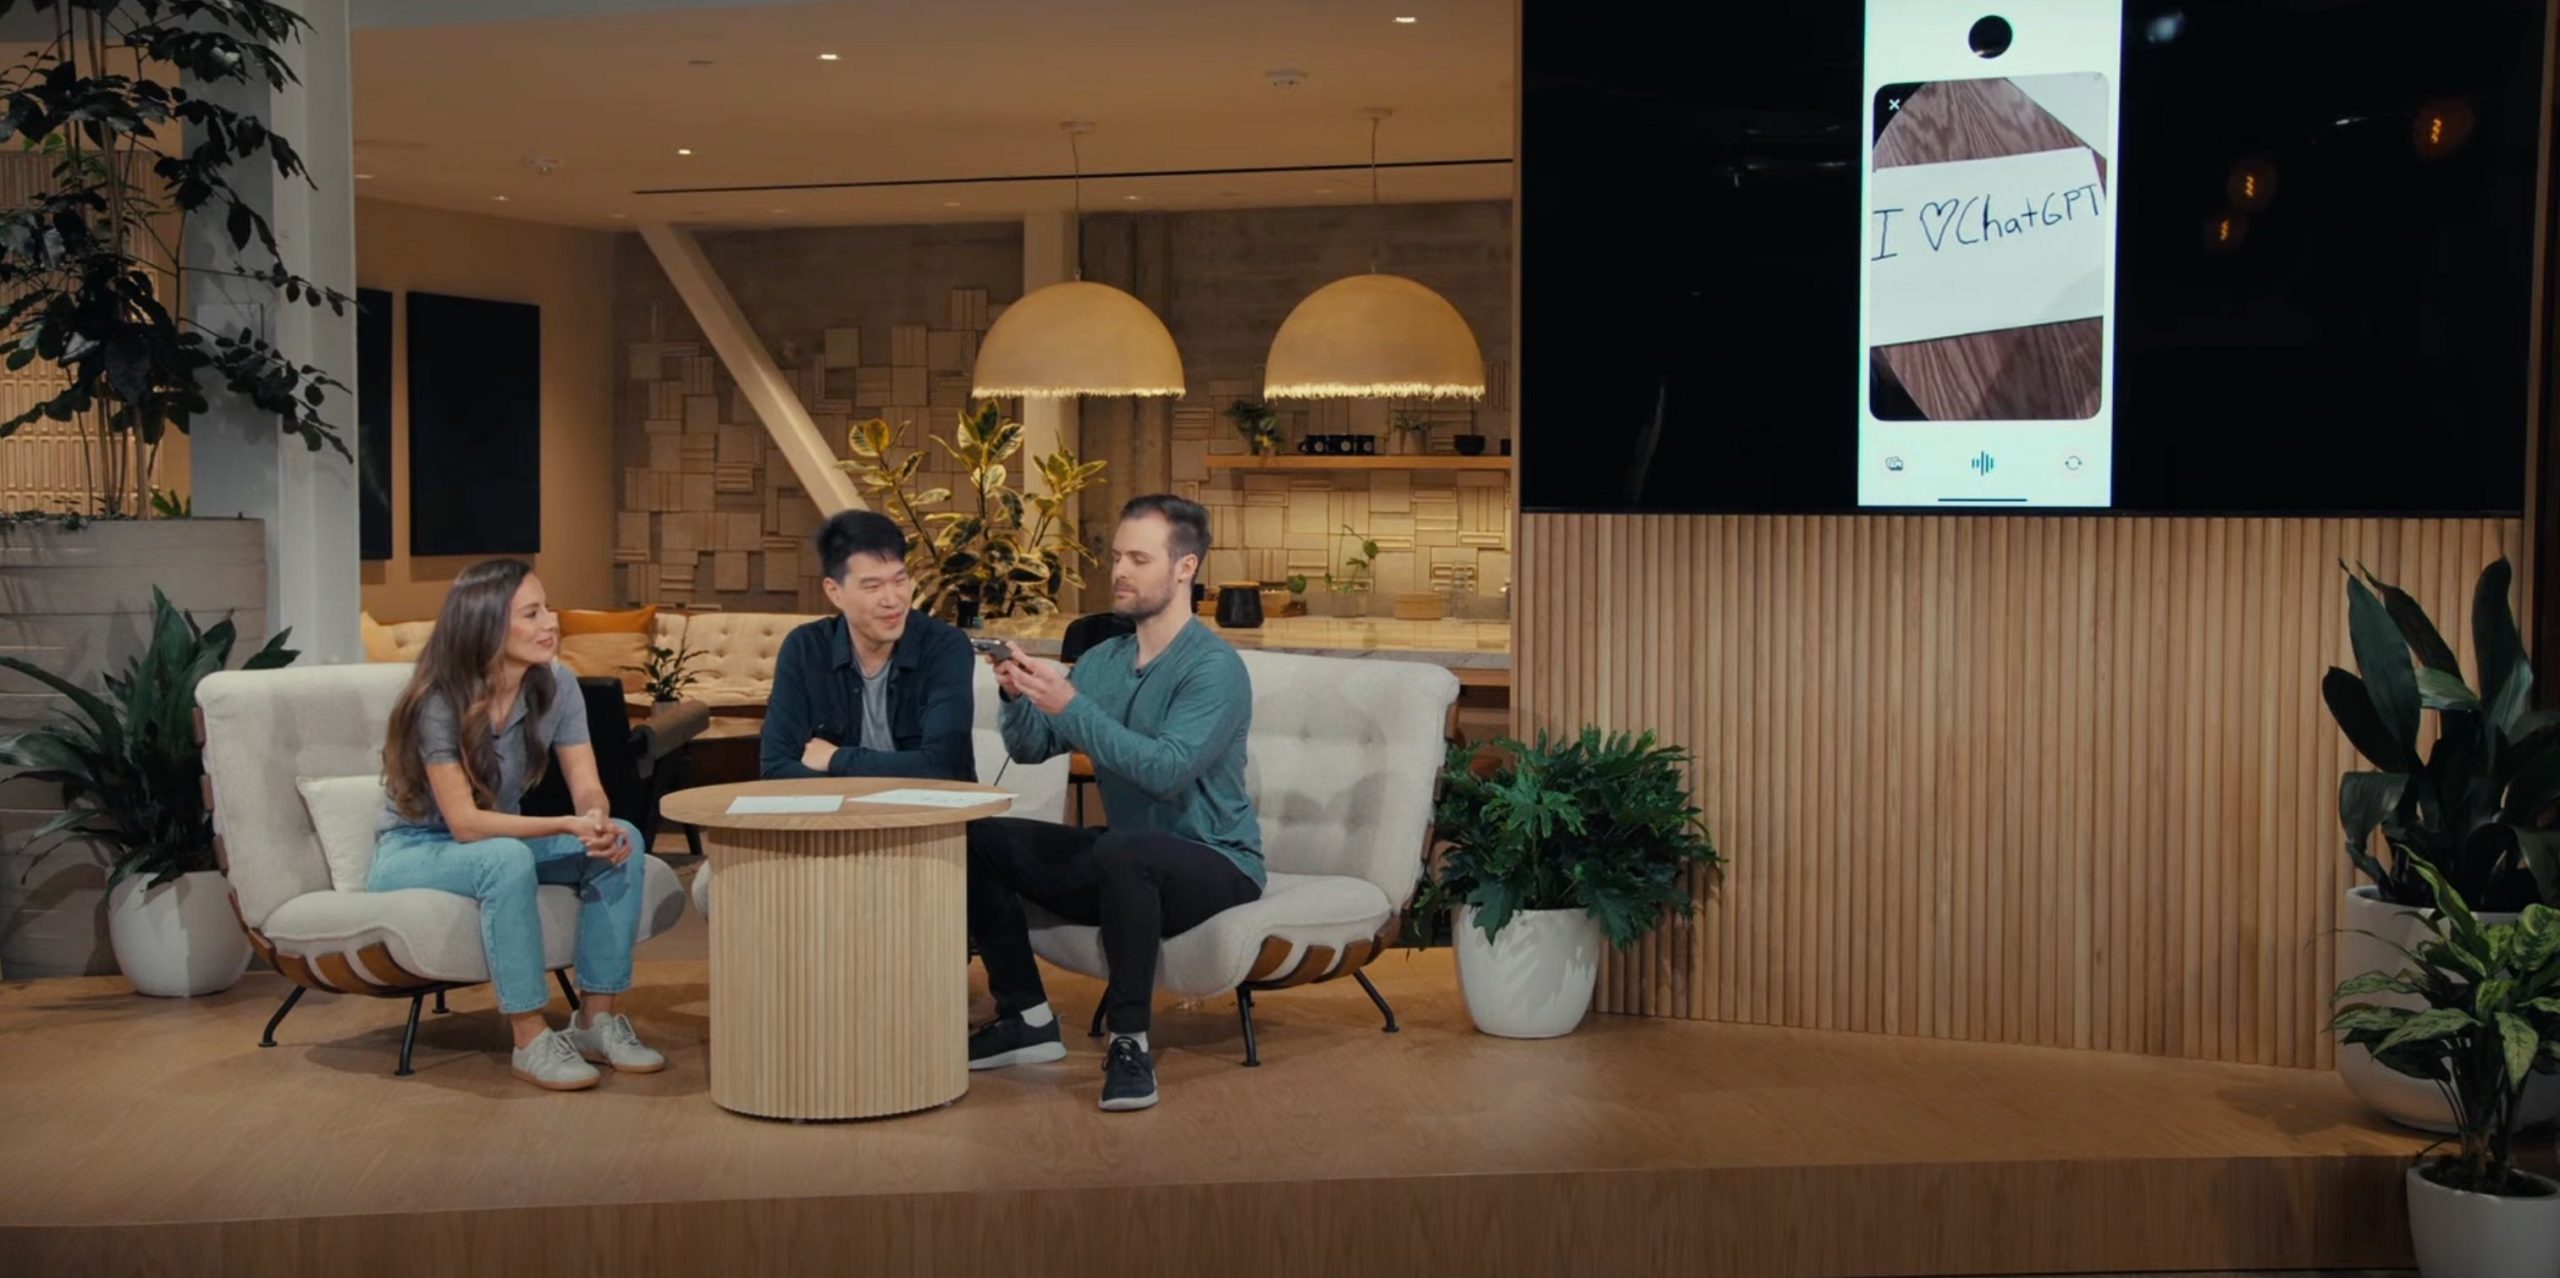 OpenAI's Mira Murati, Mark Chen, and Barret Zoph onstage at a live event